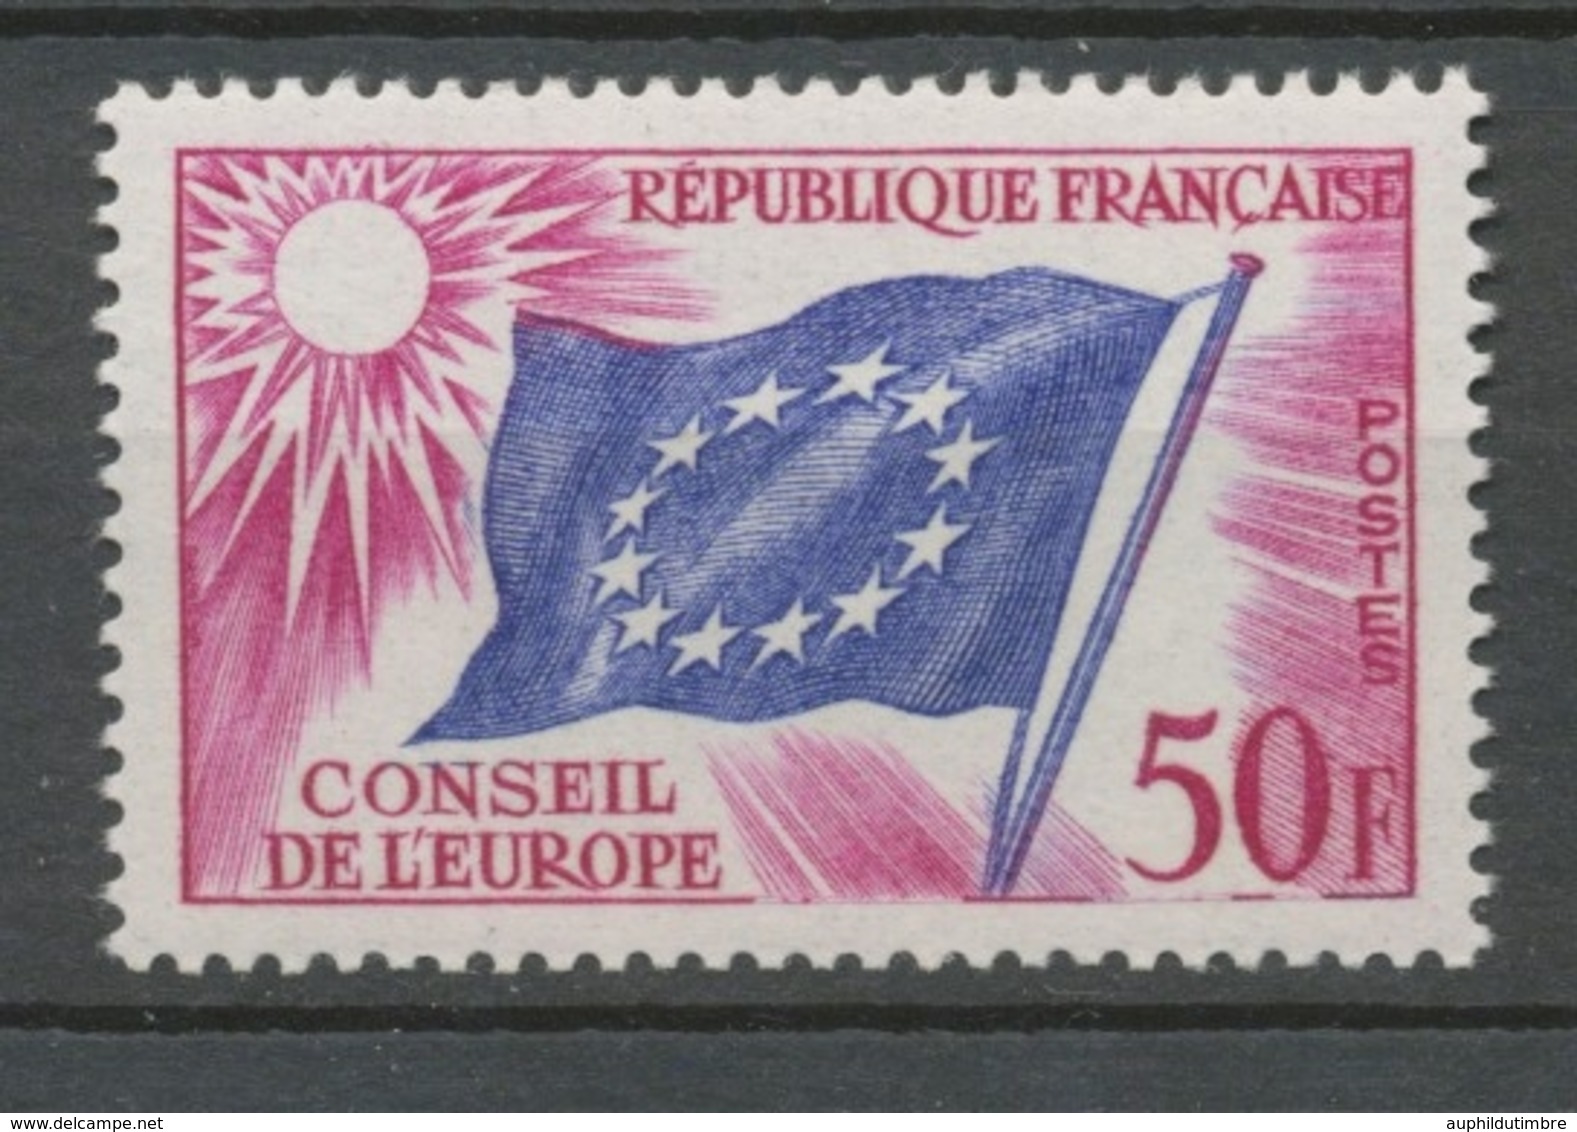 Service N°21 Conseil Europe 50 F Lilas-rose Et Outremer ZS21 - Mint/Hinged